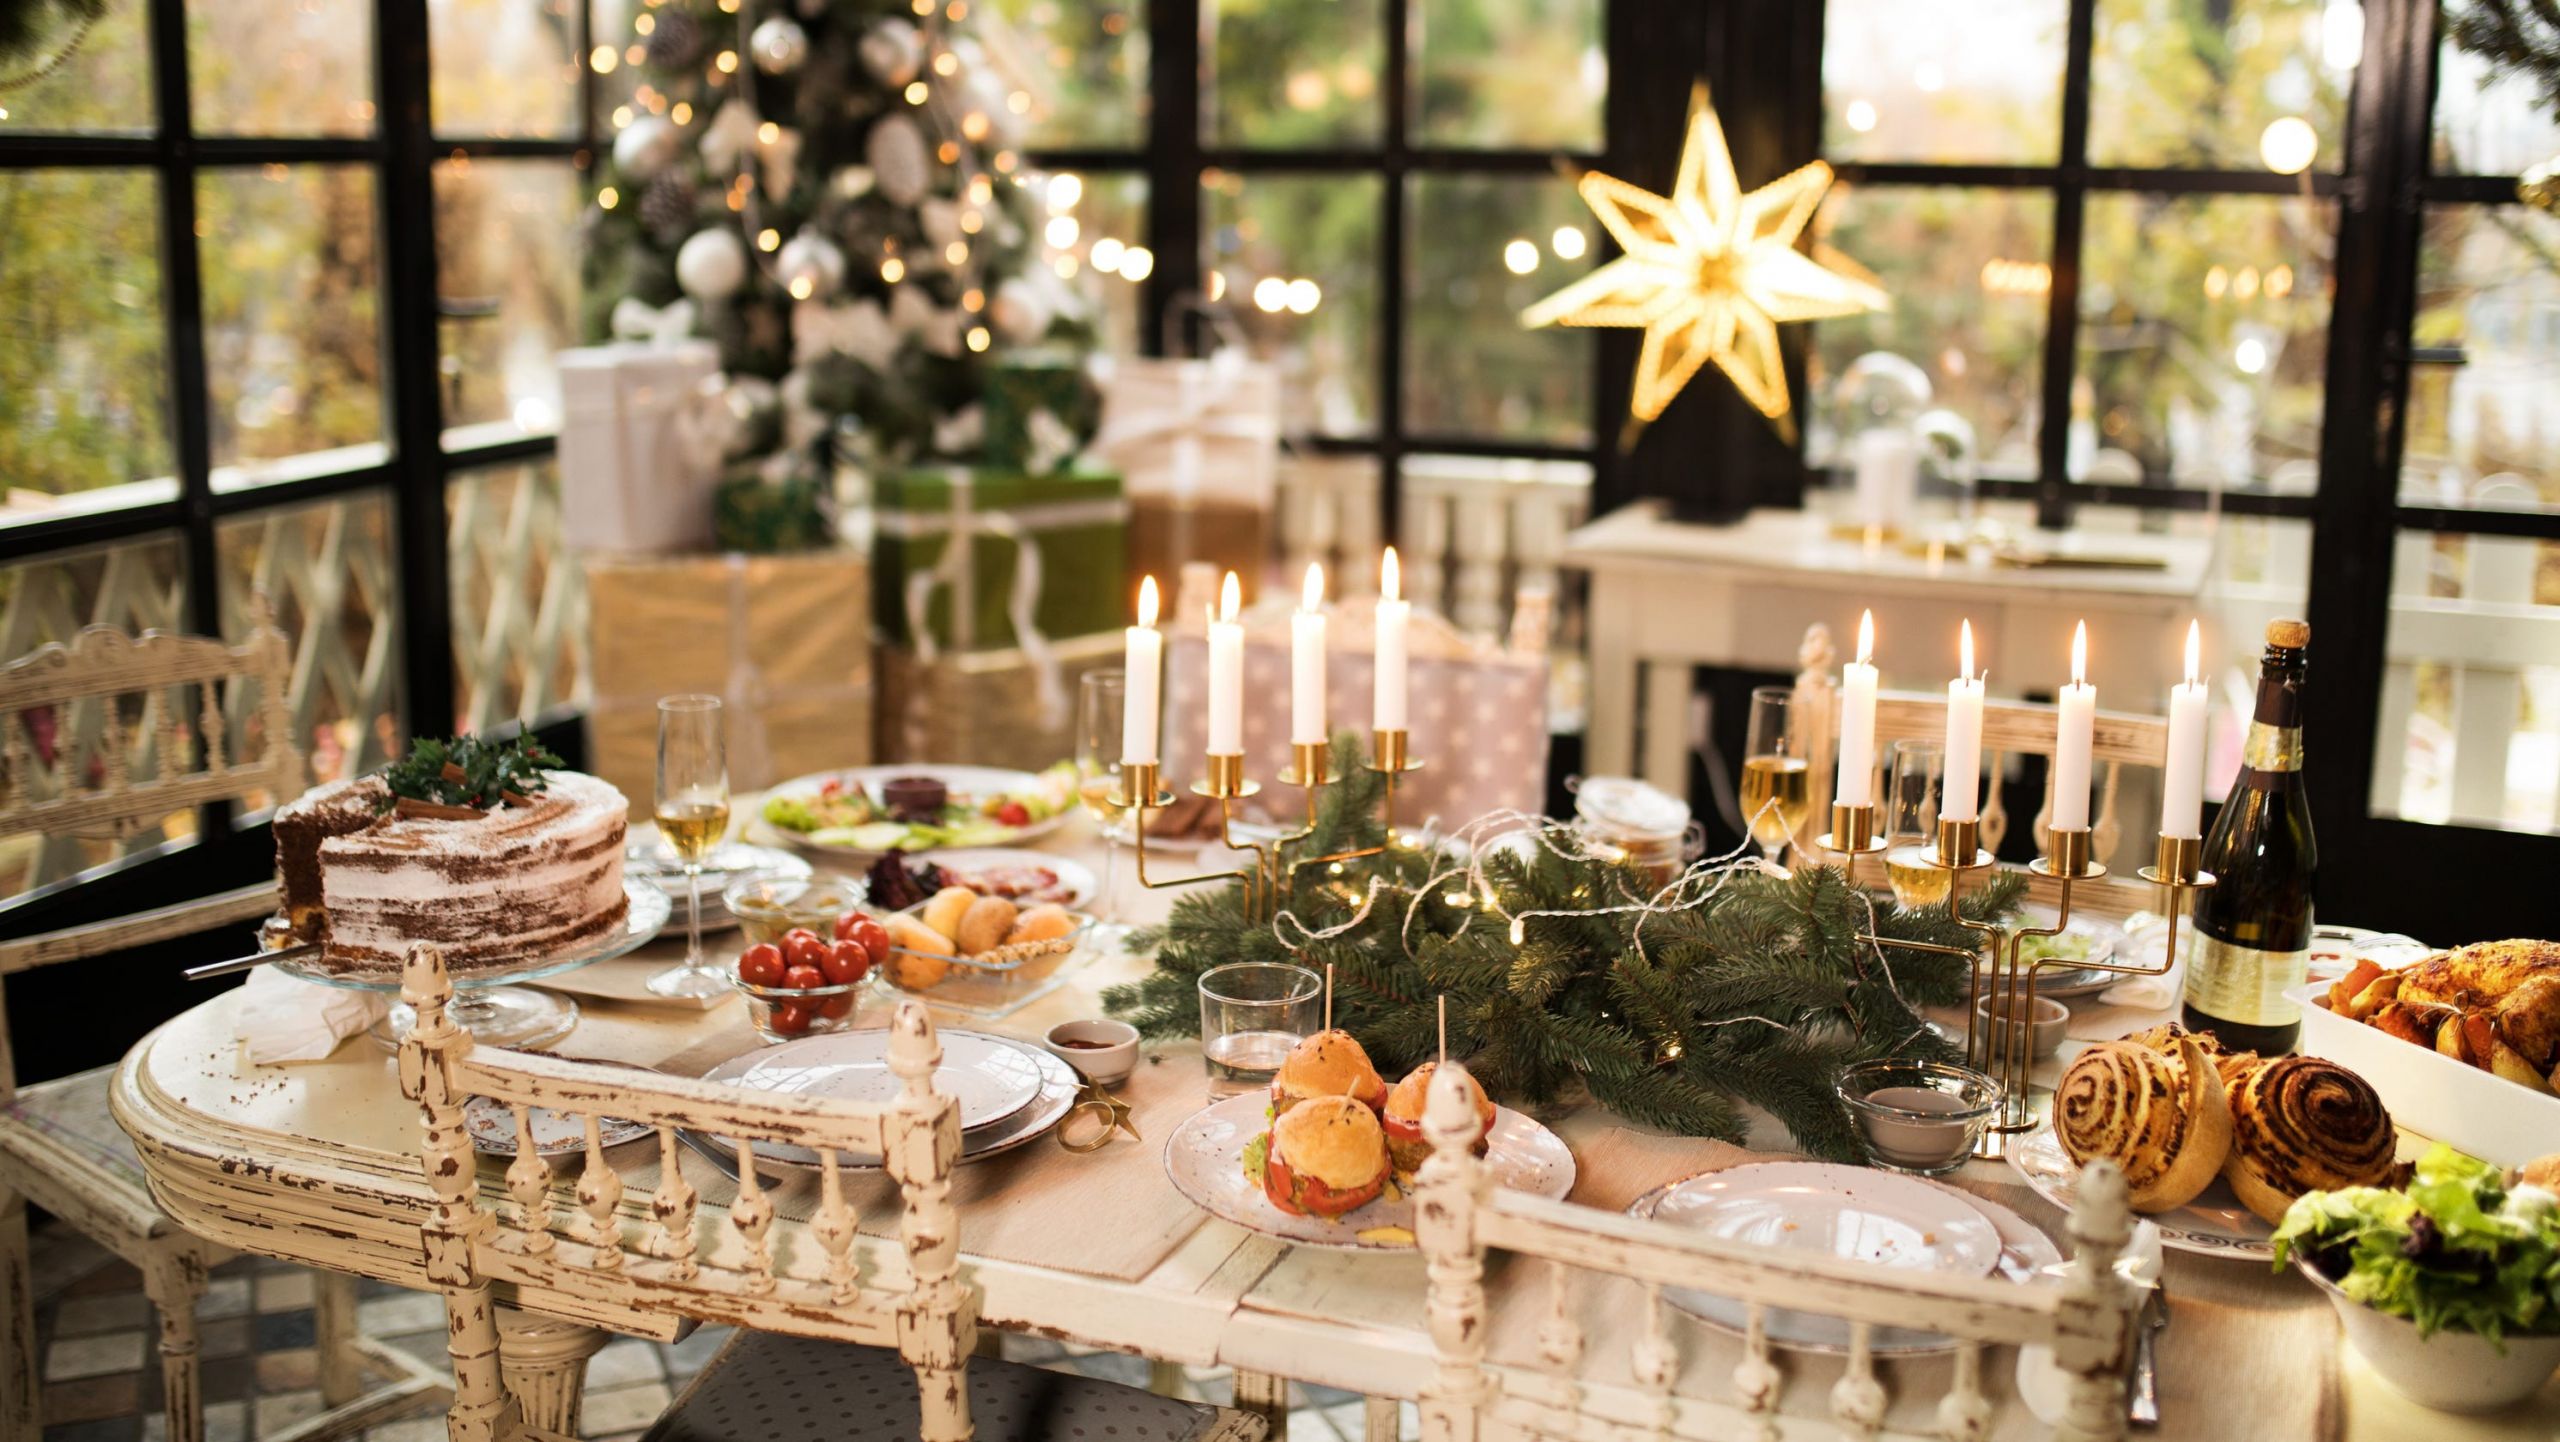 Hosting Christmas Party Ideas
 Hosting a holiday party at home SWFL designers offer